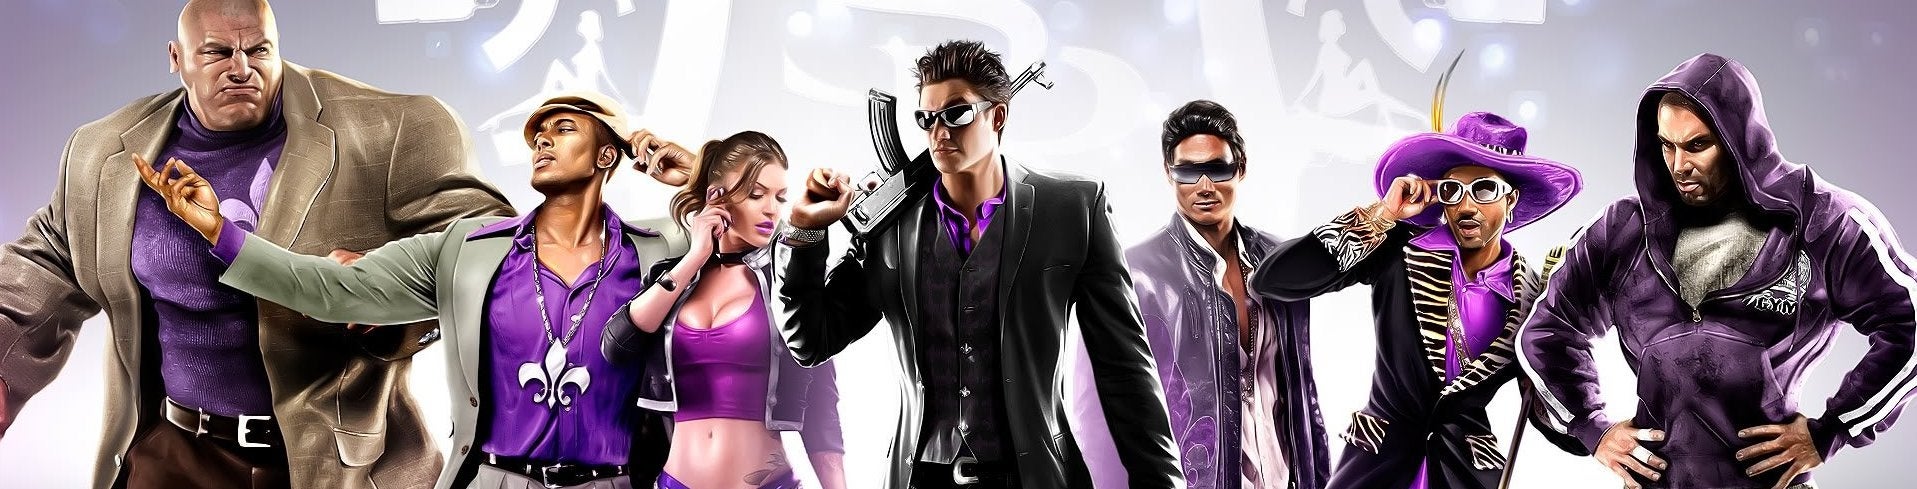 Image for Digital Foundry vs Saints Row 4: Re-Elected on PS4